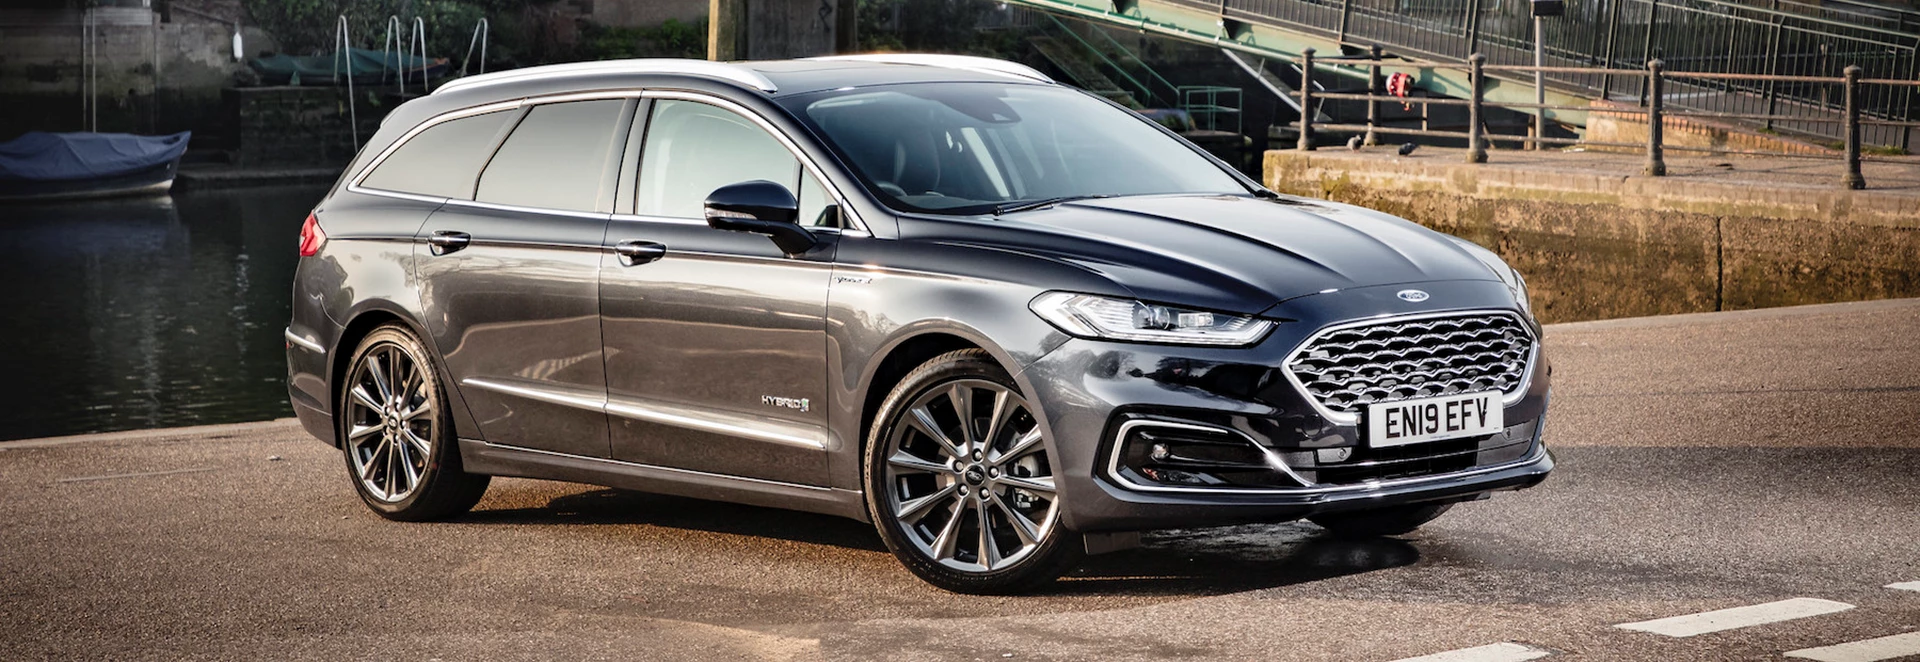 Buyer’s guide to the 2021 Ford Mondeo 